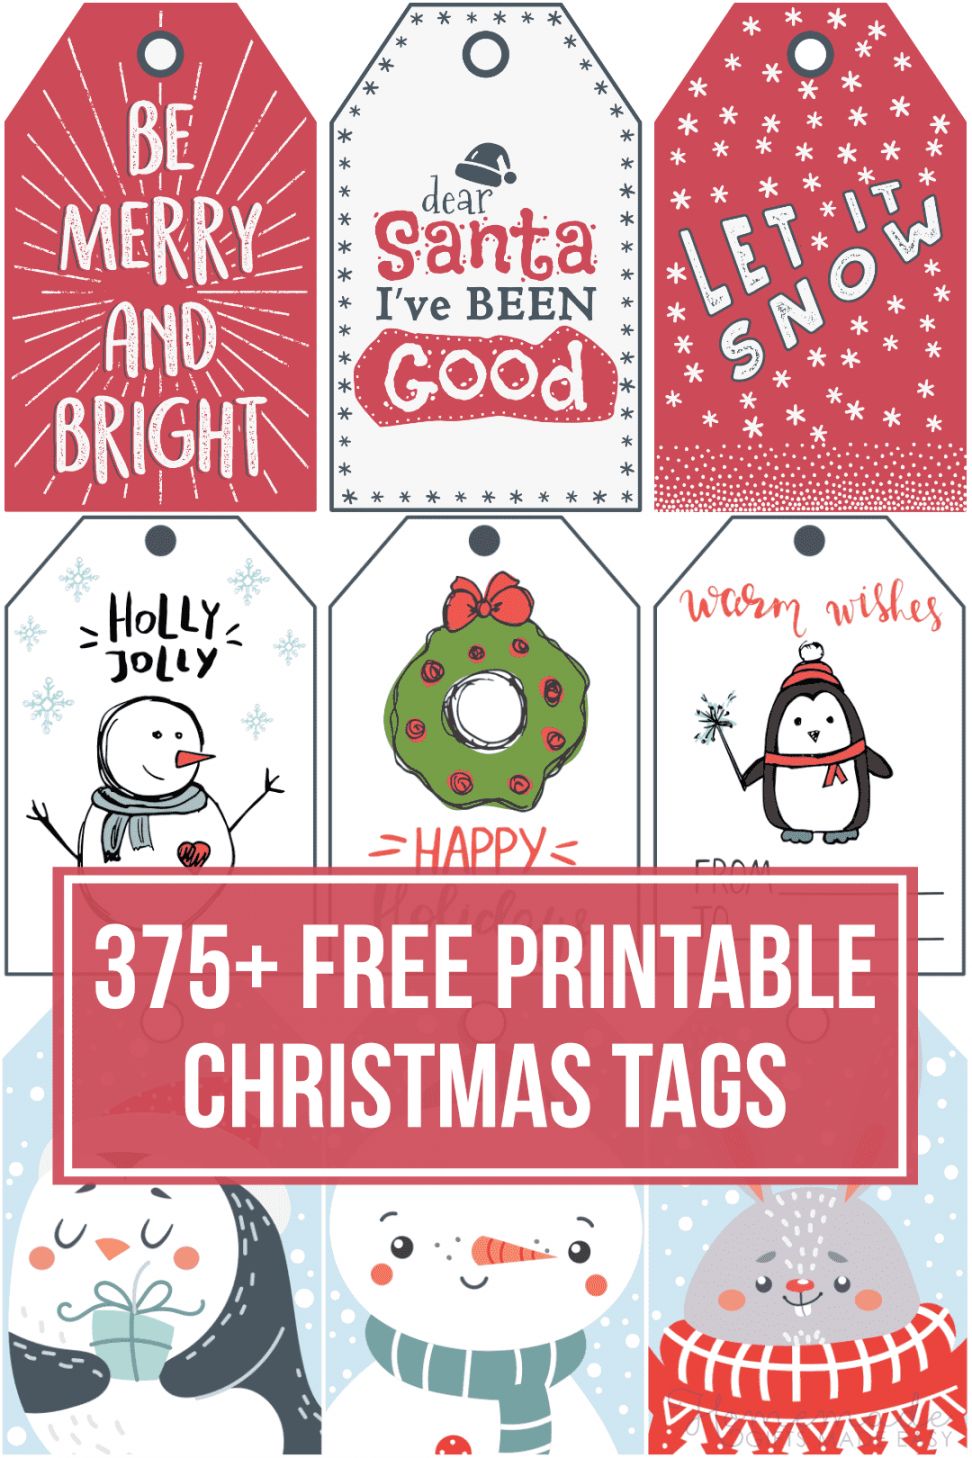 Gift Tags Printable Free - Printable - + Free Printable Christmas Tags for your Holiday Gifts